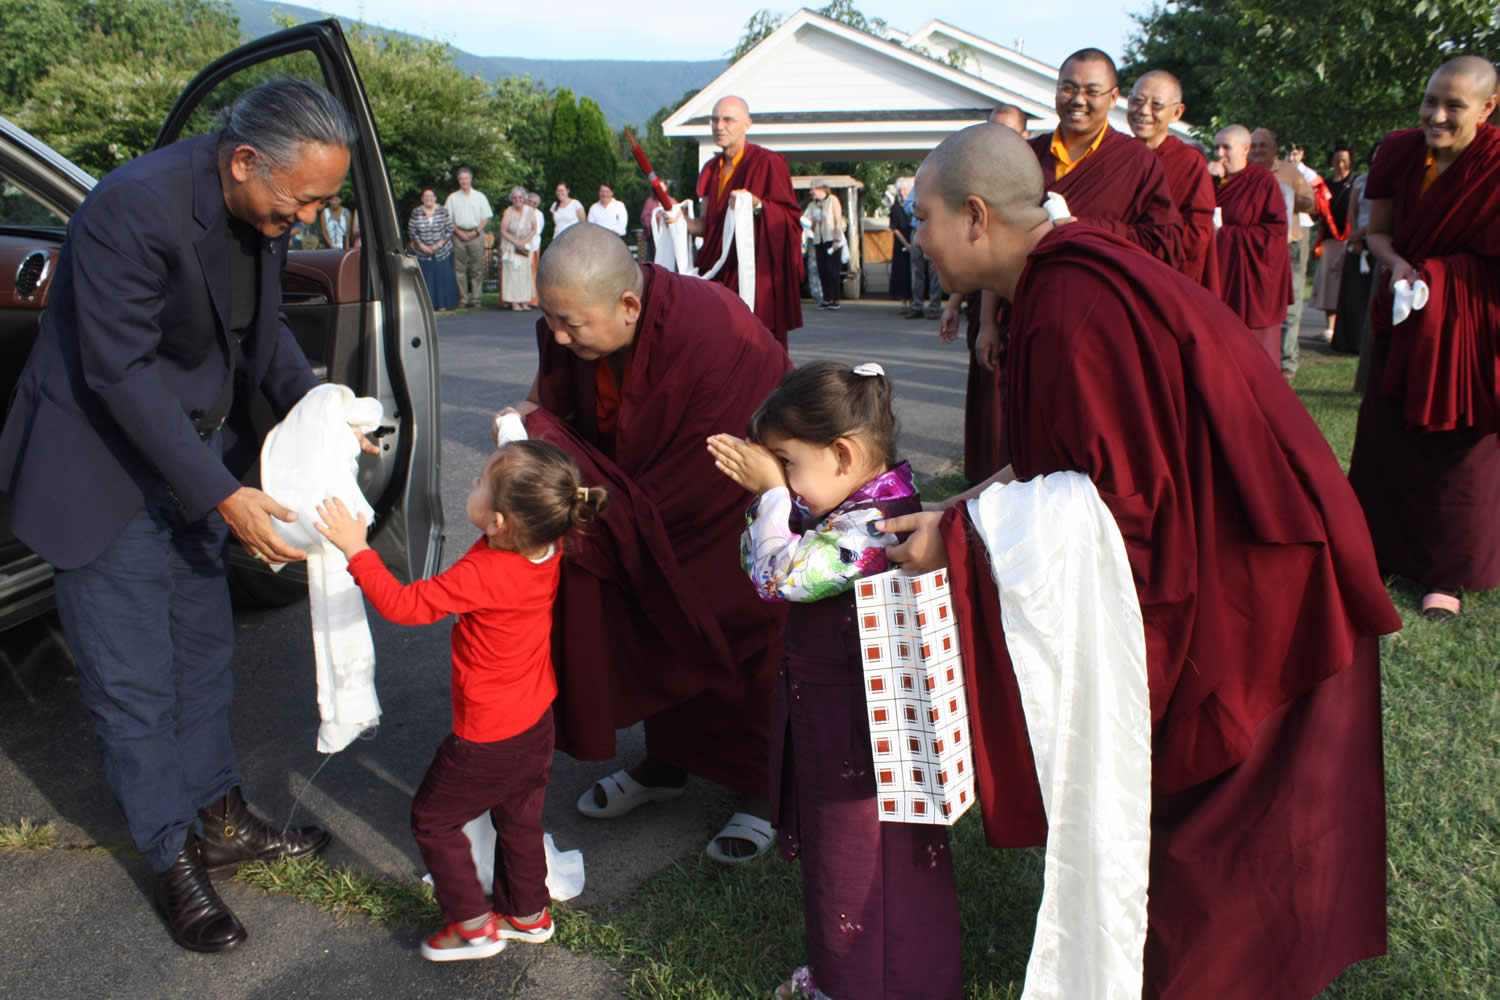 His Eminence Dzigar Kongtrul Rinpoche is greeted by Dungse Rinpoche, Jetsün Rinpoche, Her Eminence Jetsün Khandro Rinpoche, monks, nuns and sangha members.